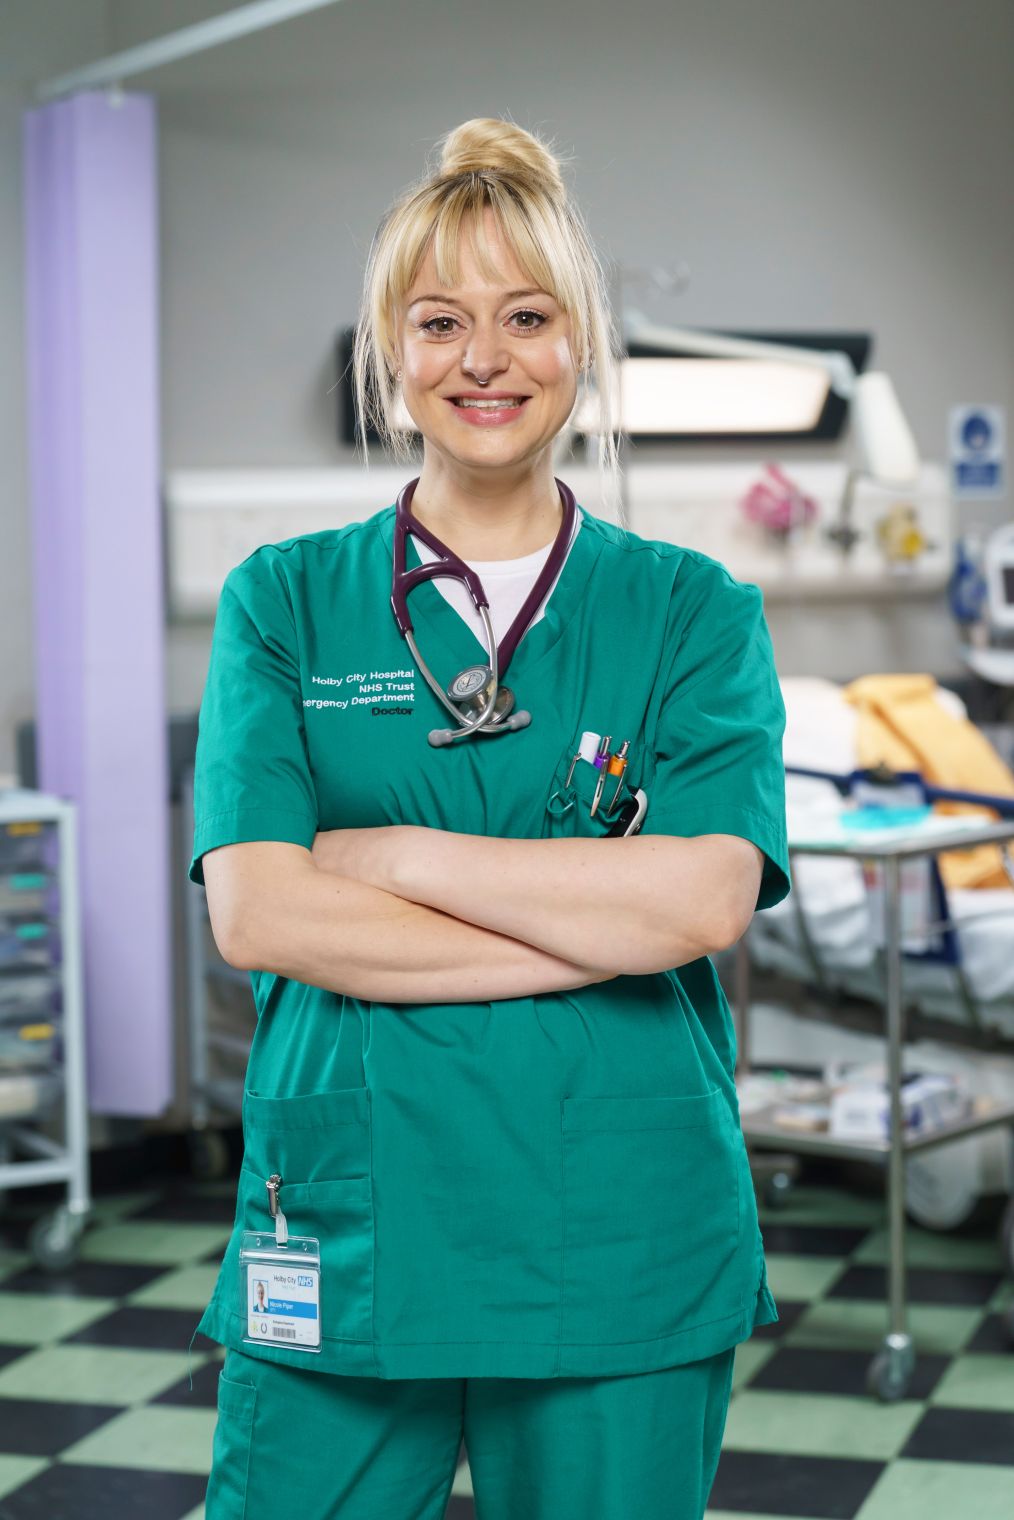 The BBC has announced that Sammy T. Dobson is joining the cast of Casualty as new junior doctor Nicole Piper